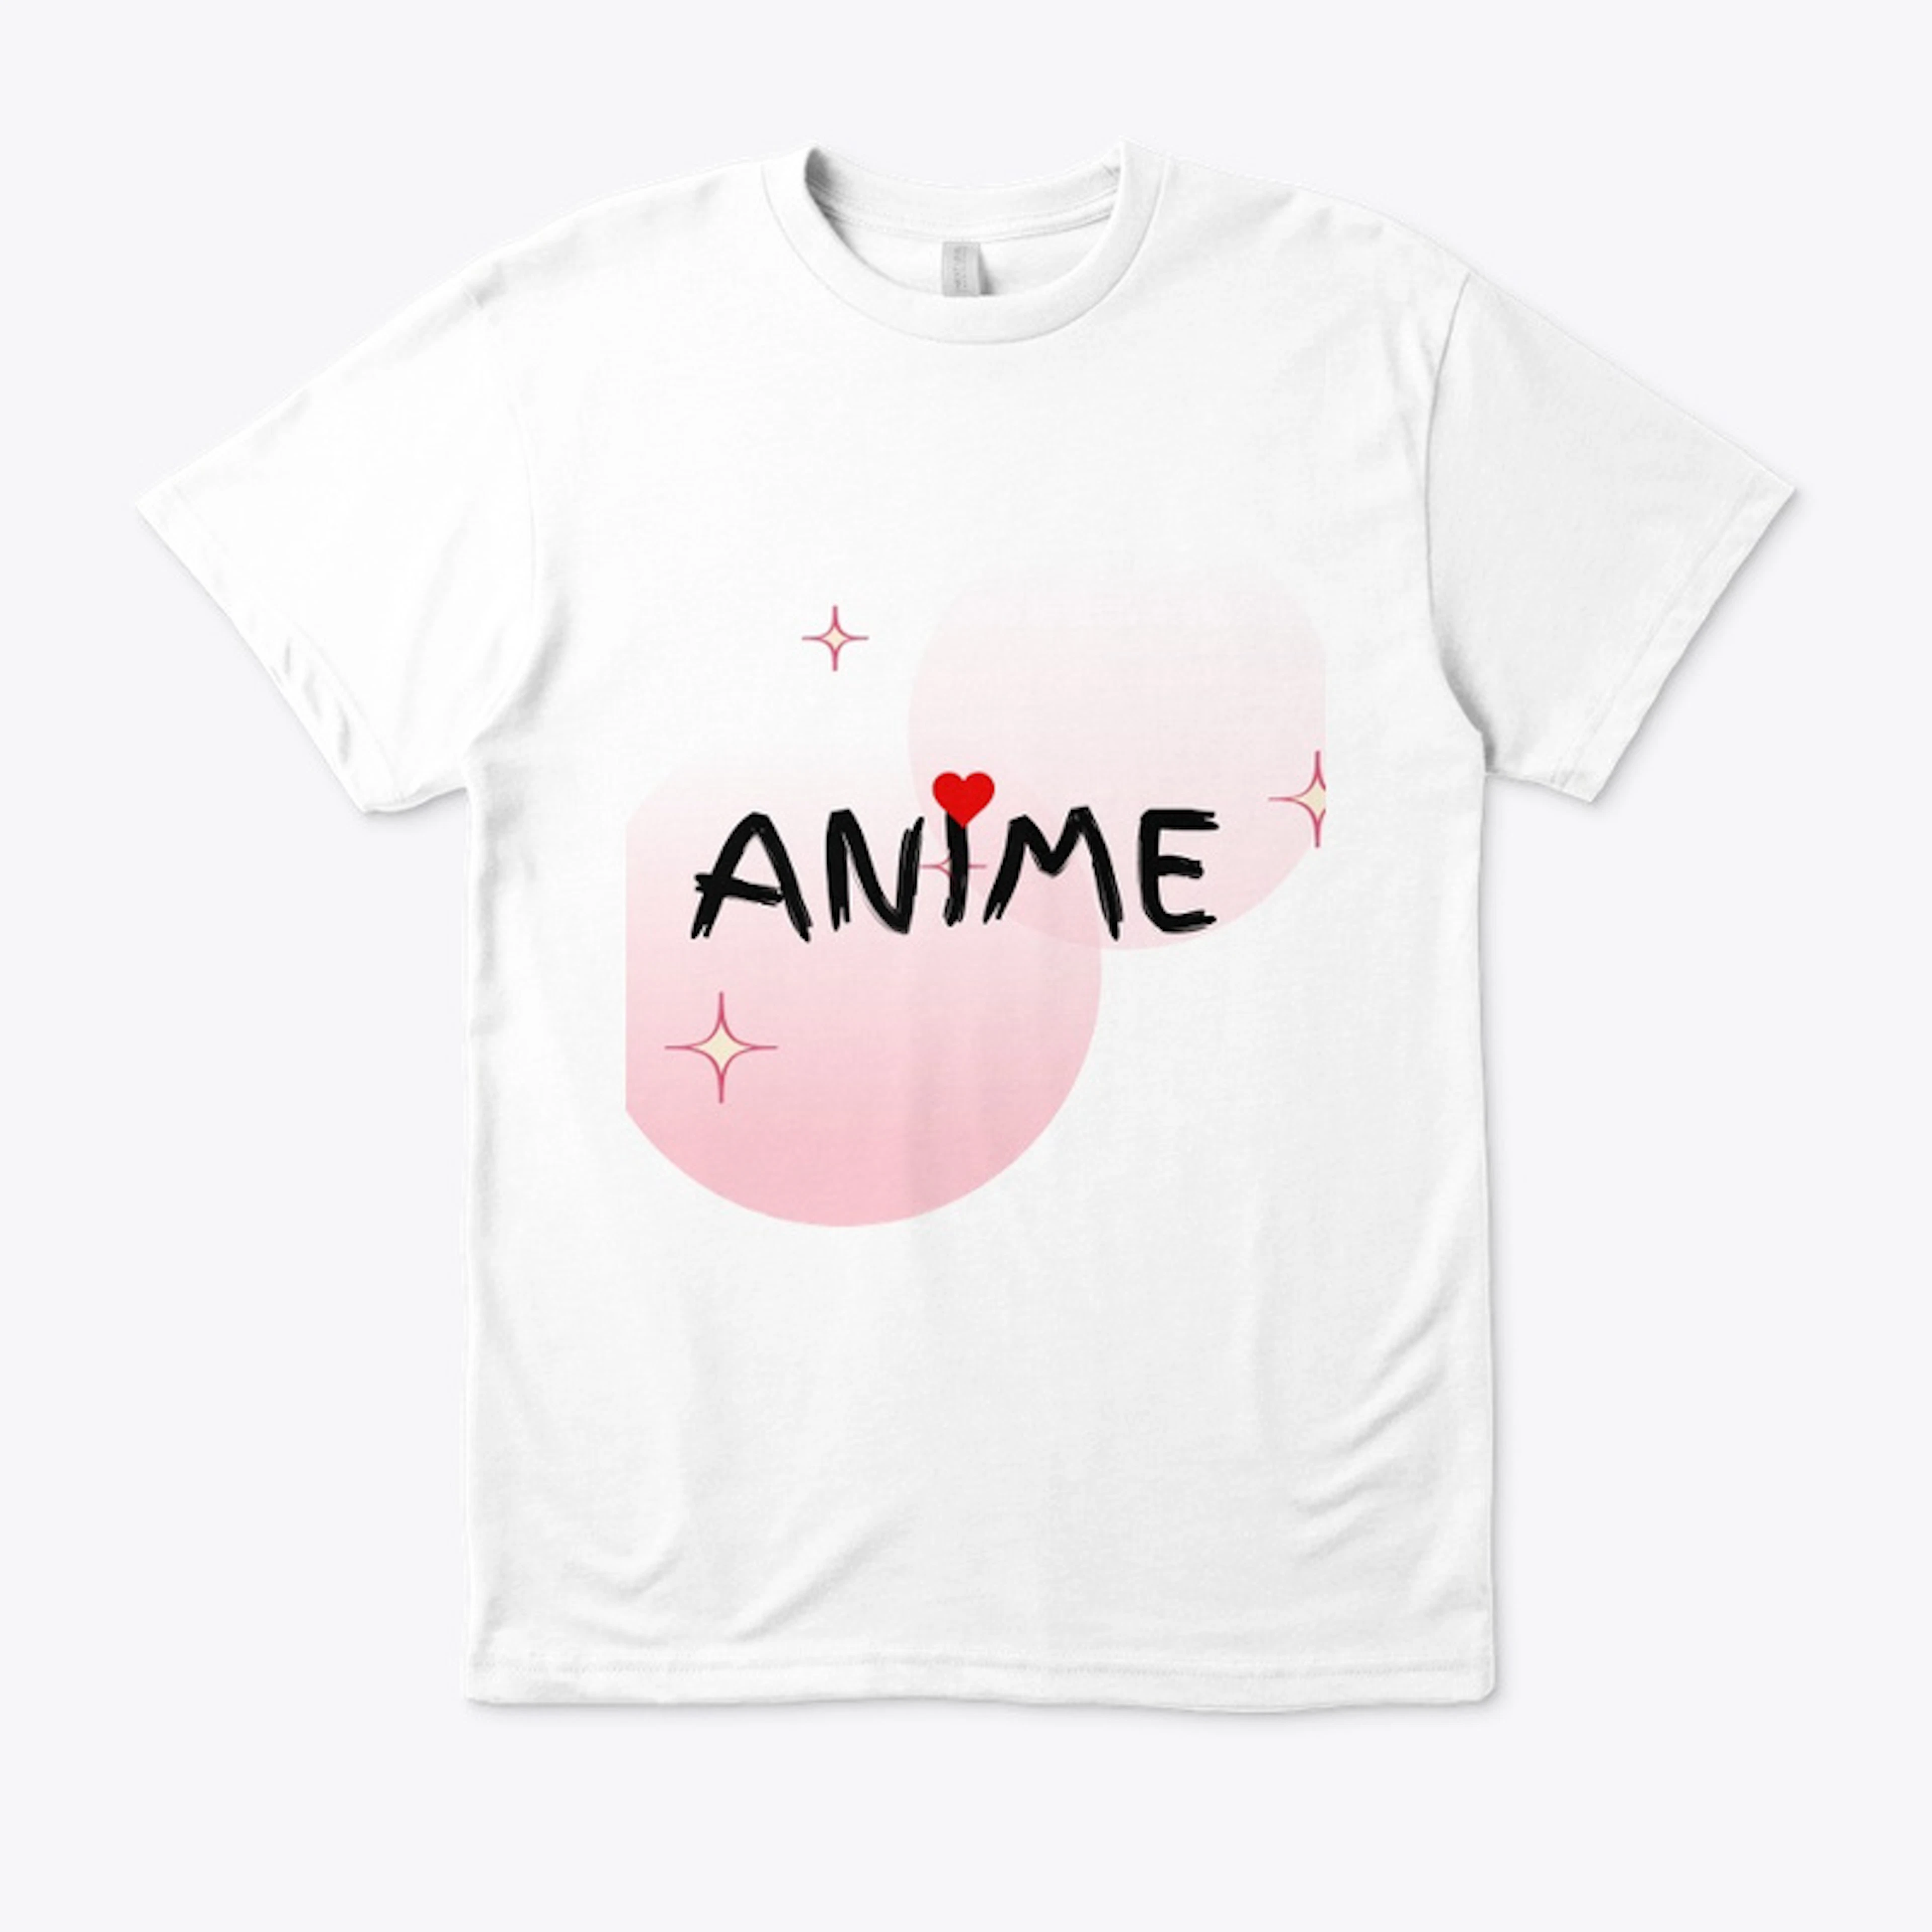 We Love Anime Over Here- White Version